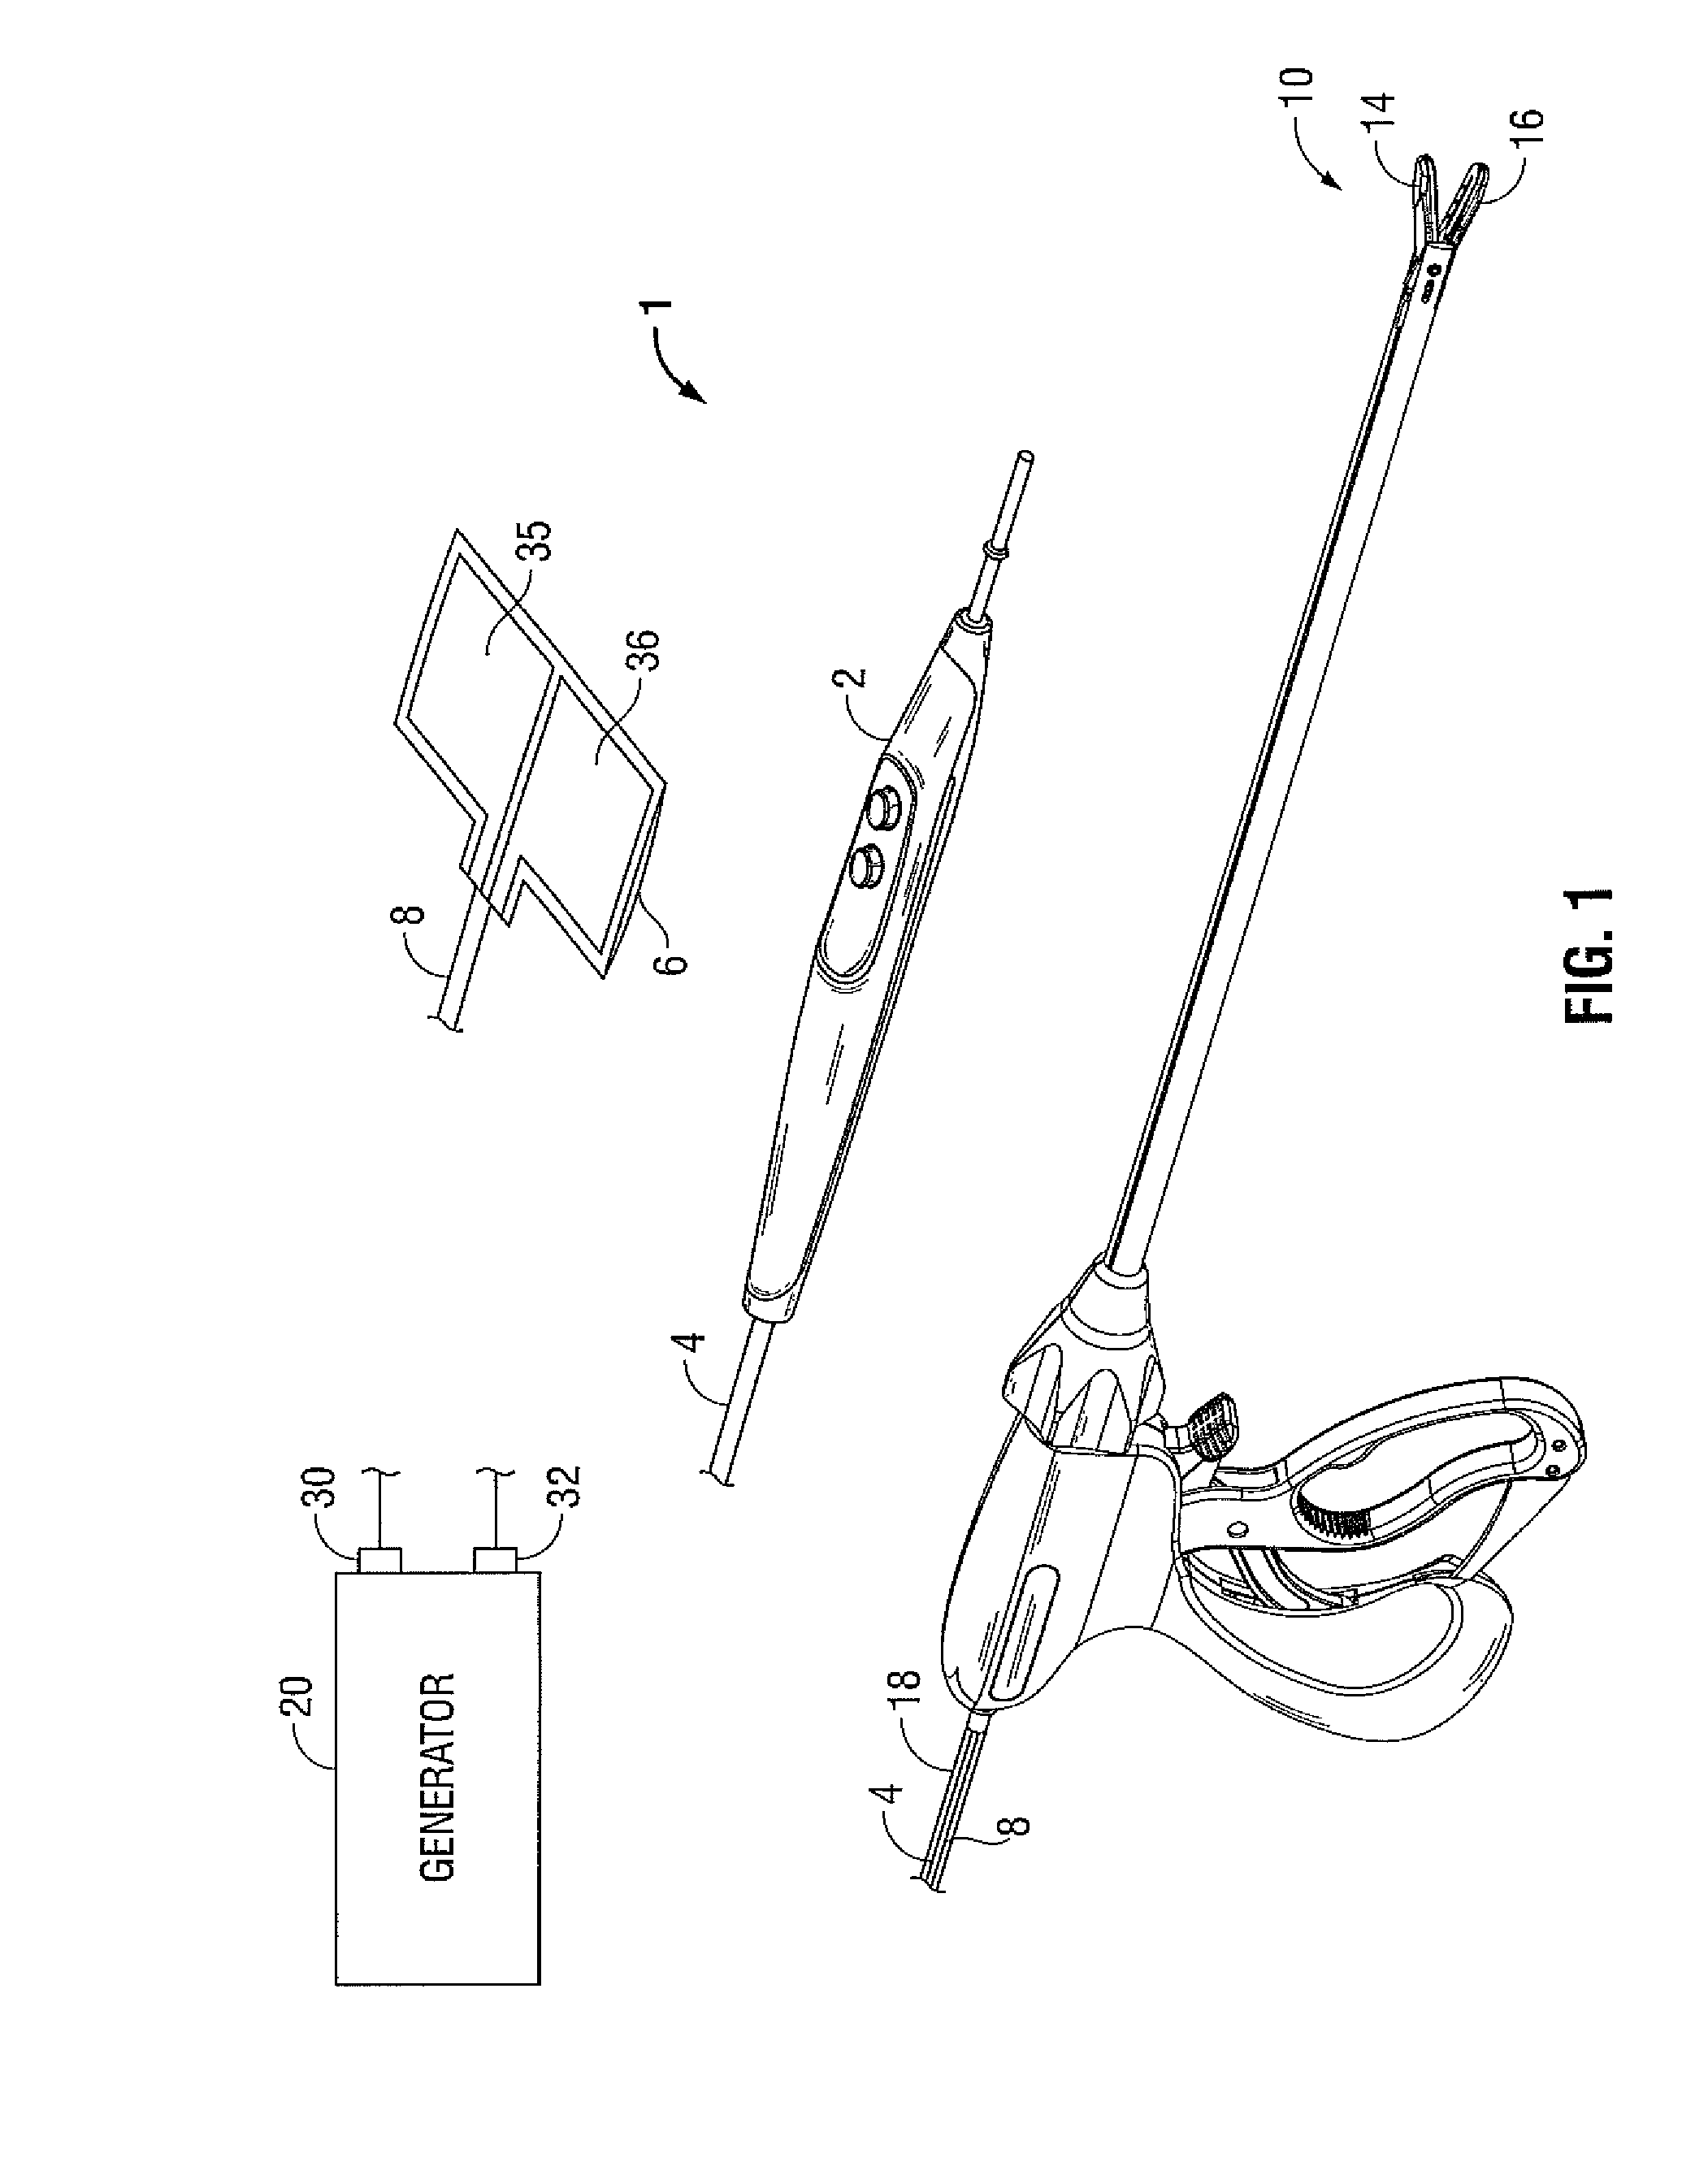 System and method for augmented impedance sensing